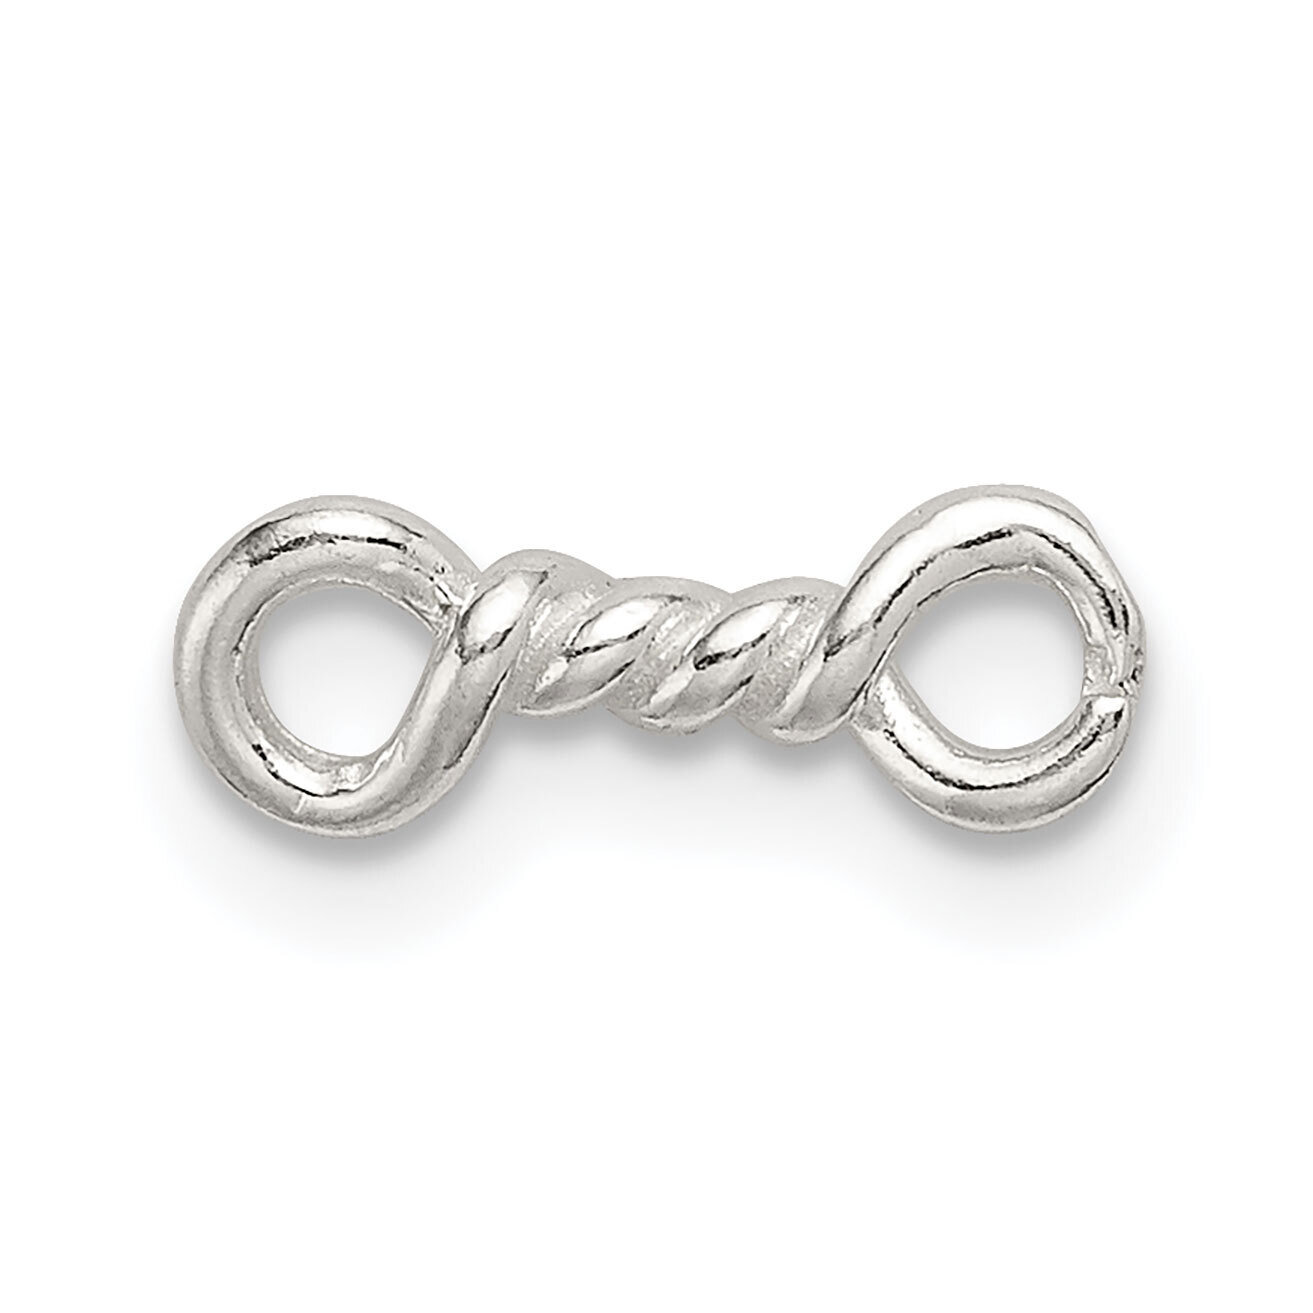 11.4 x 4mm Polished Casted Component Link Sterling Silver SS4383